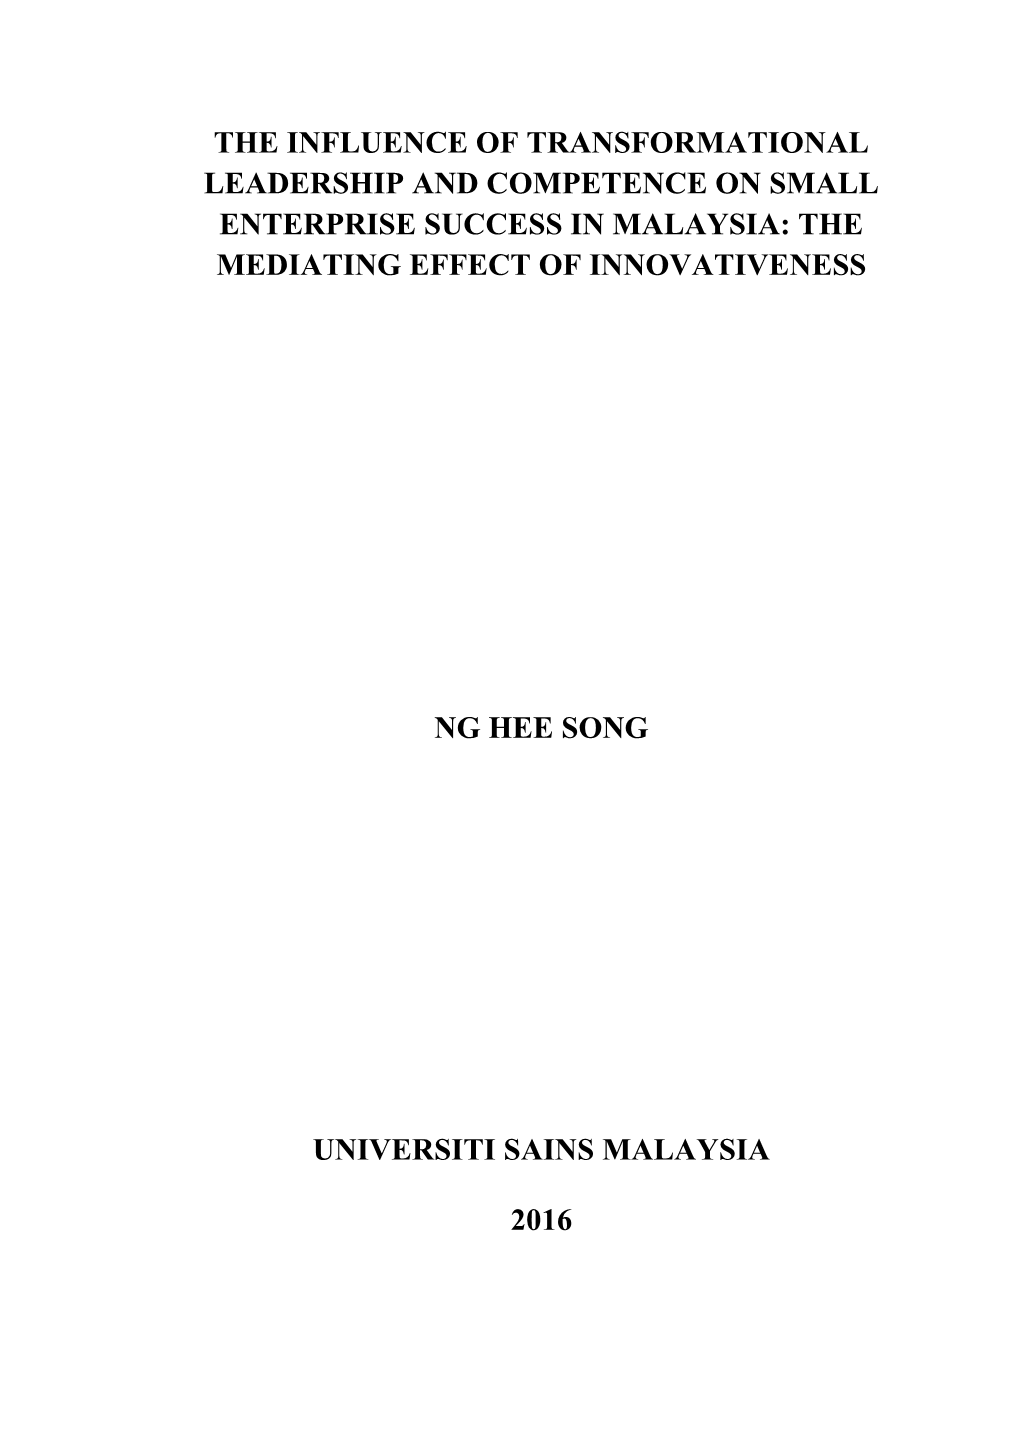 The Influence of Transformational Leadership and Competence on Small Enterprise Success in Malaysia: the Mediating Effect of Innovativeness